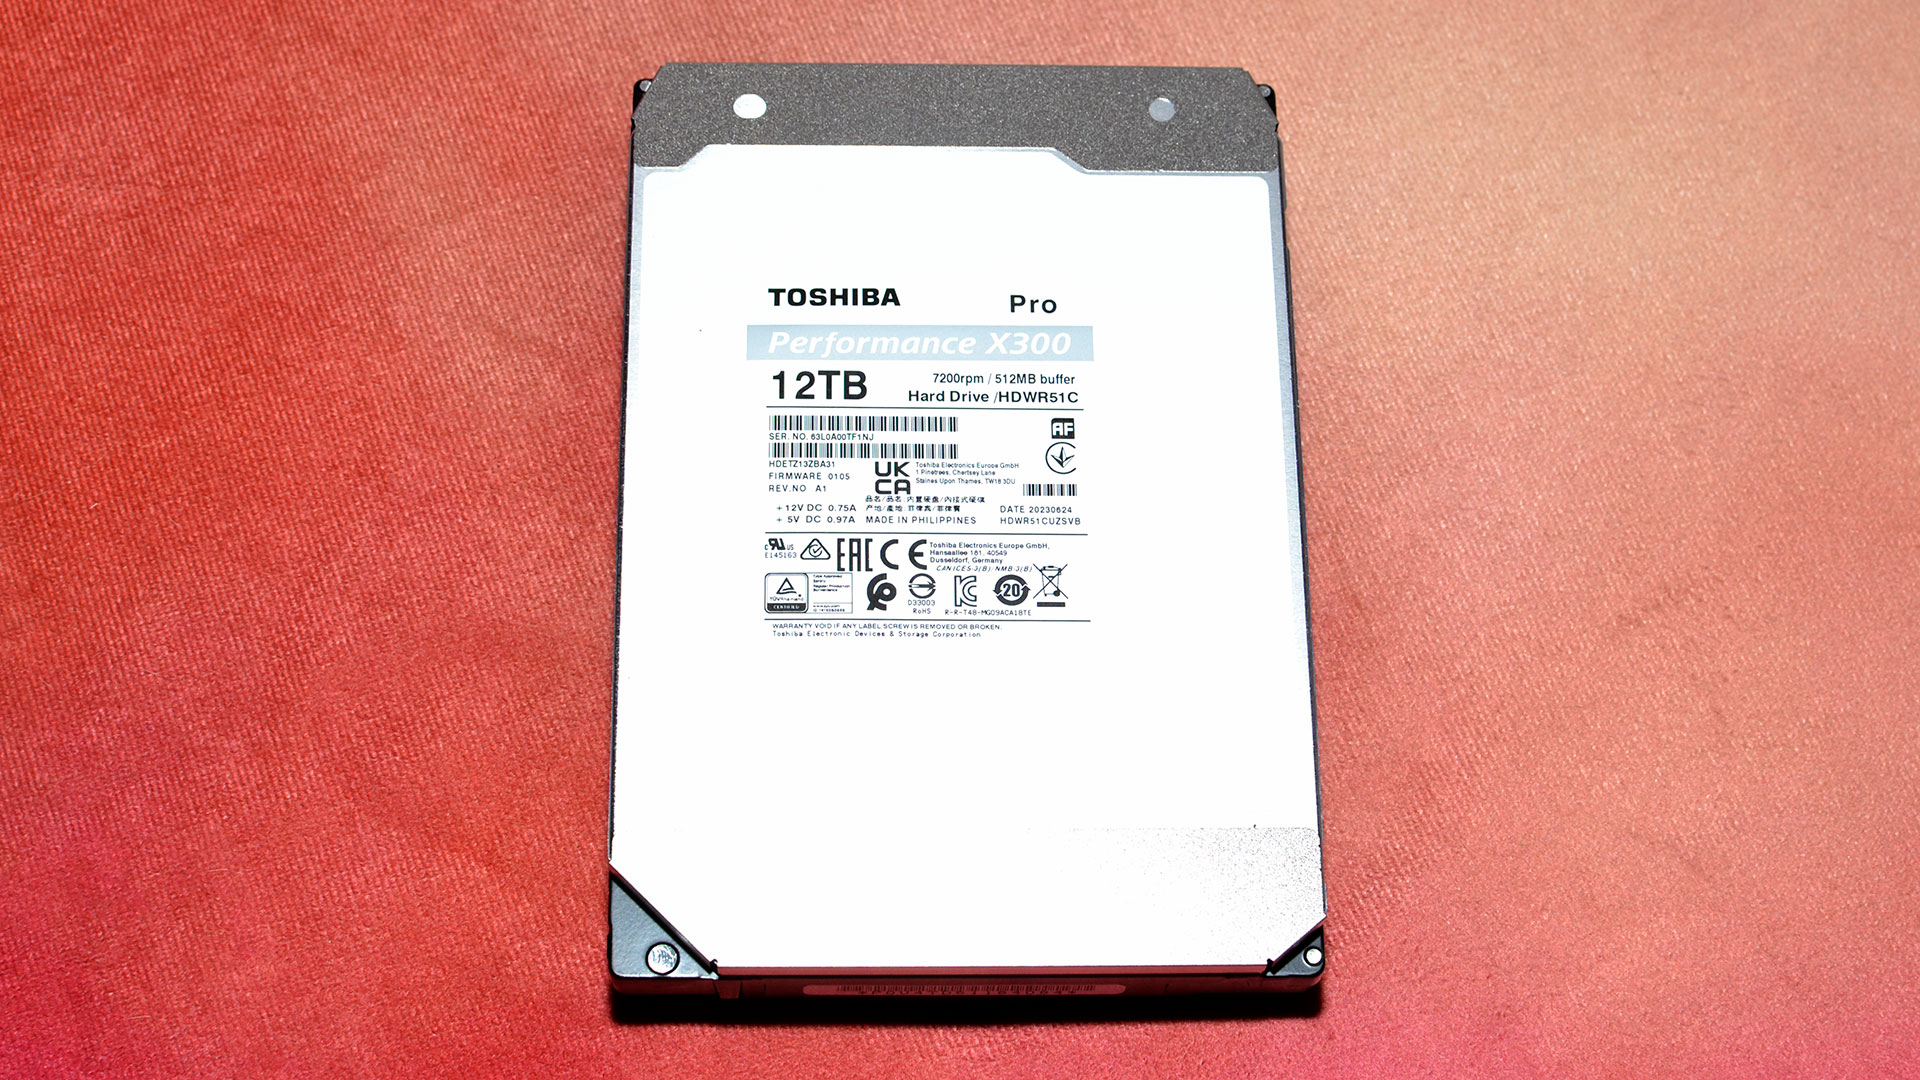 Toshiba X300 Pro 12TB and 20TB HDD review: Much better than its non-Pro siblings